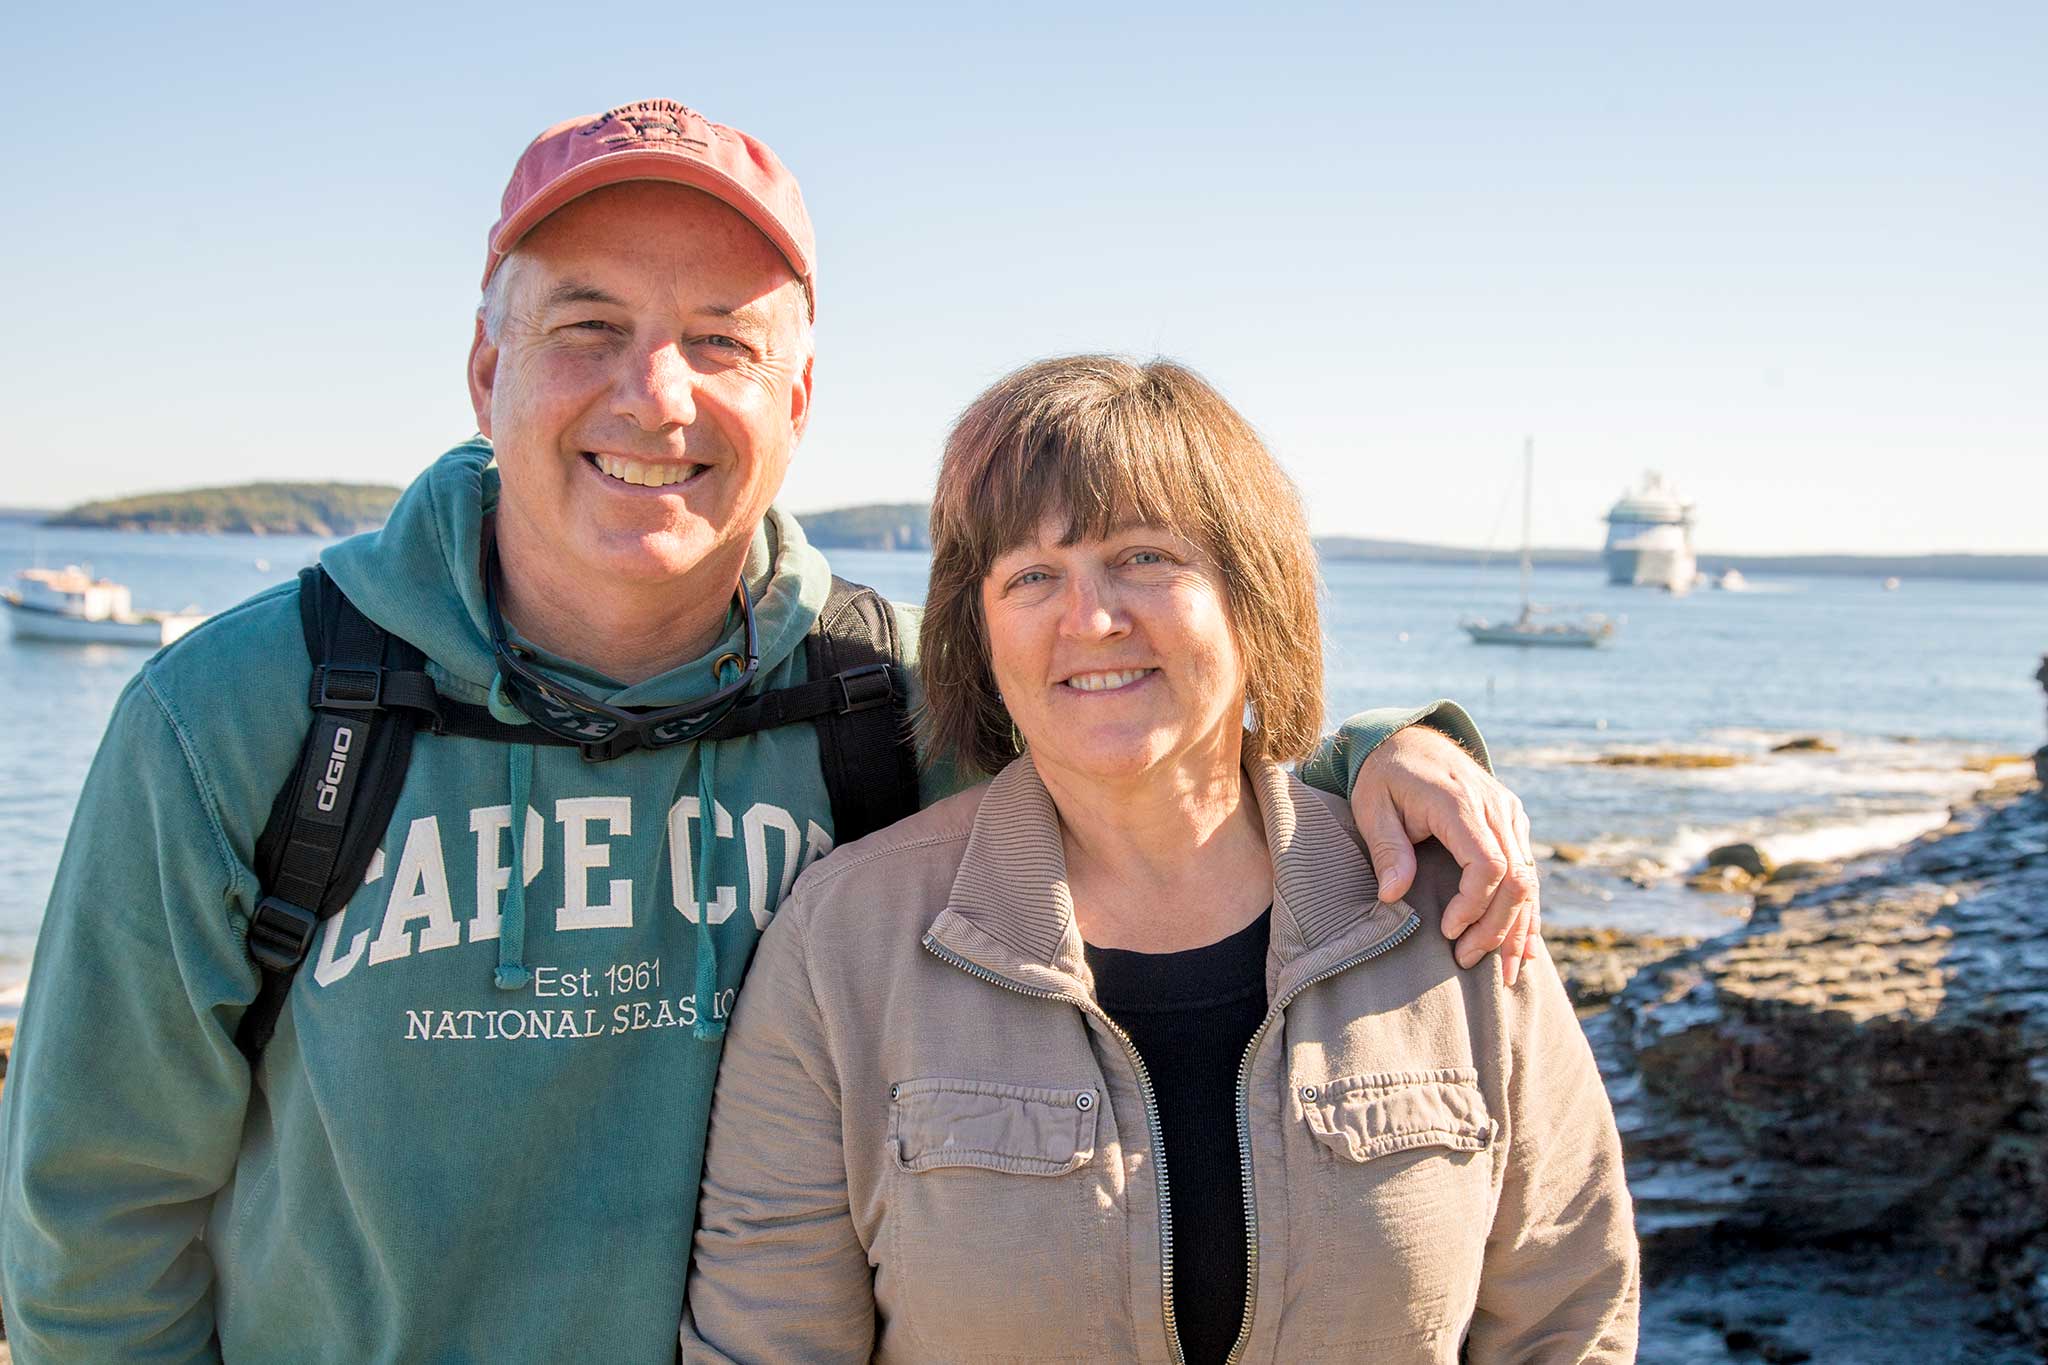 A couple in their early 60s smile for the camera with the man’s arm around his wife’s shoulder; a sunny, blue bay with small green hills and various boats are in the background.